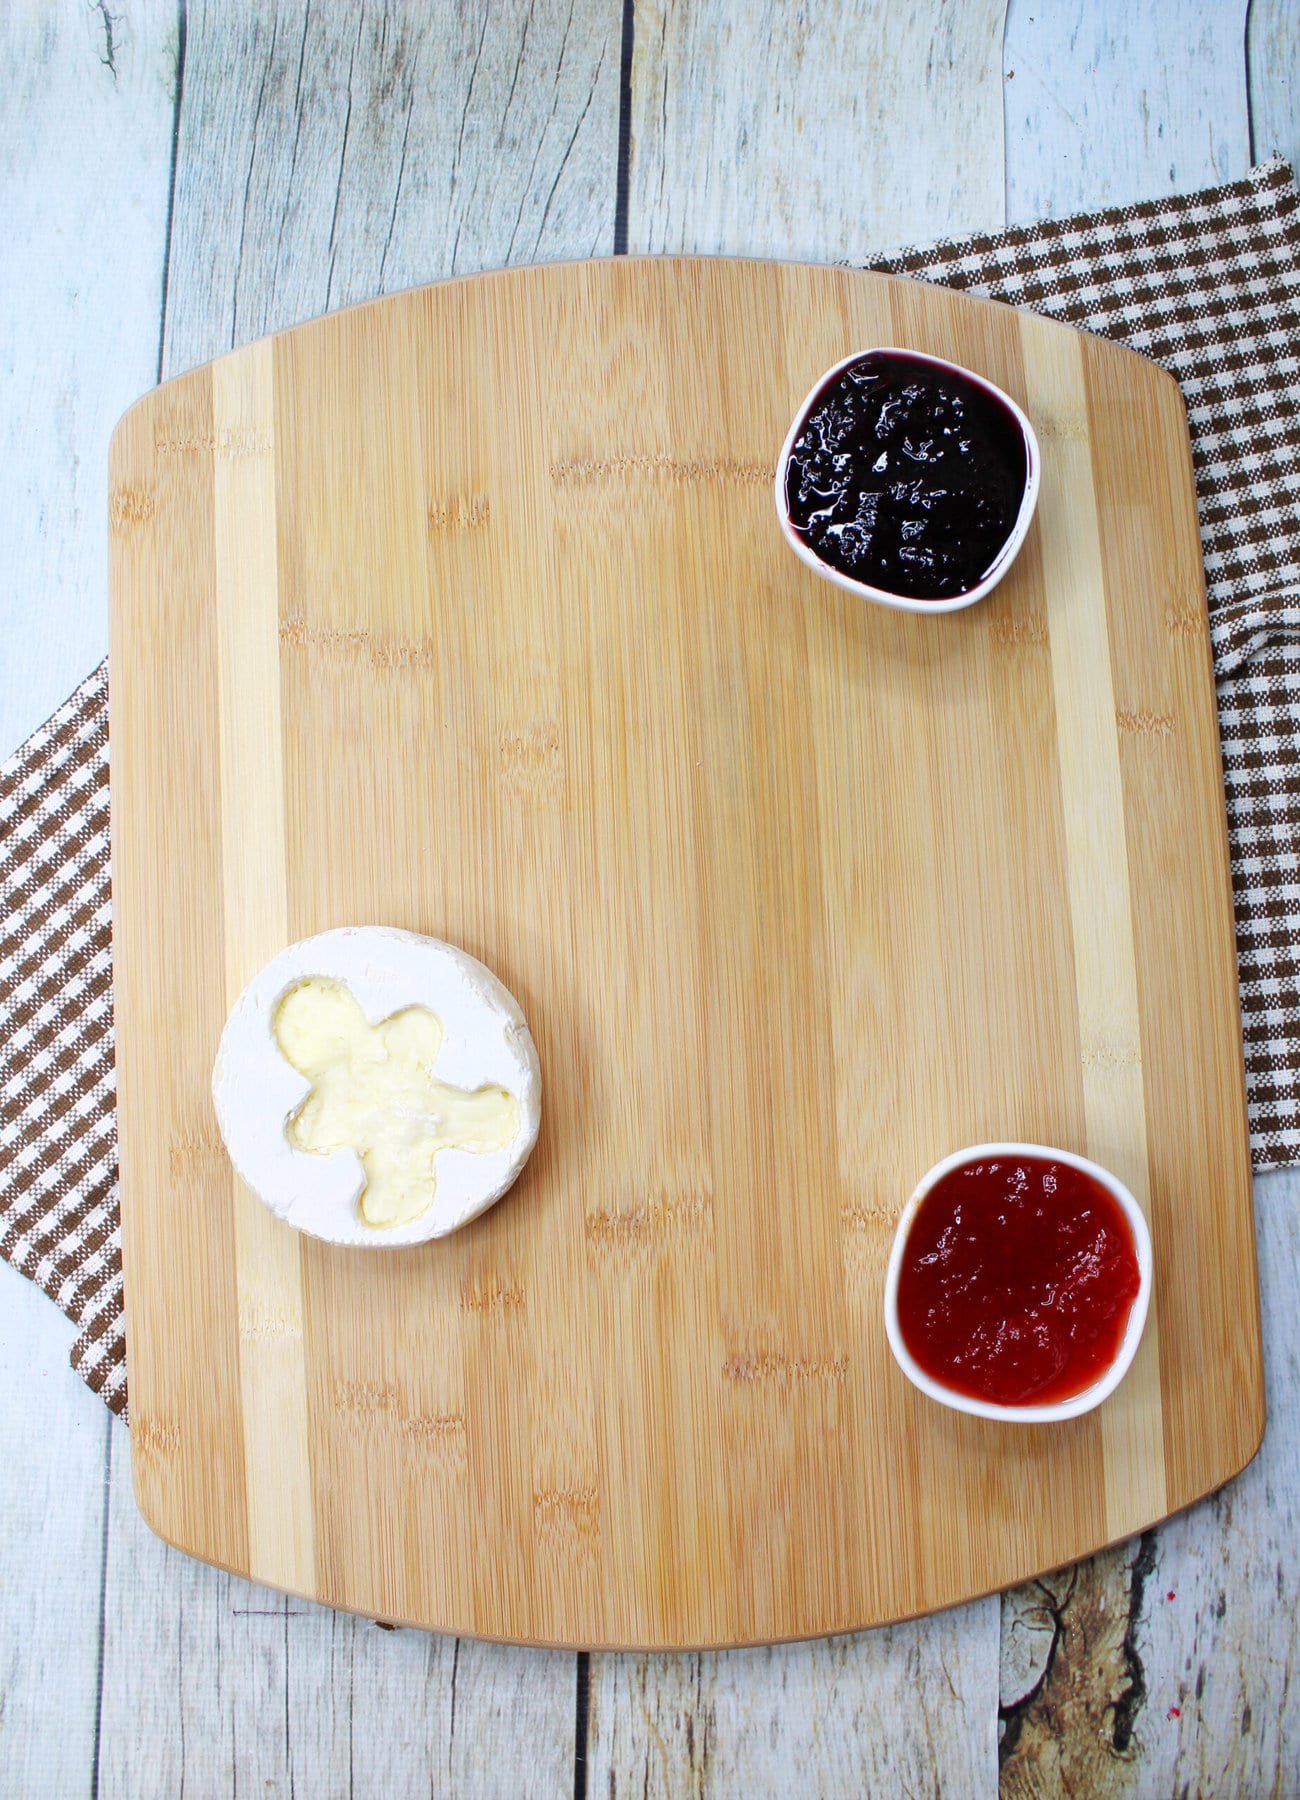 Adding the brie, jam, and jelly onto the board.